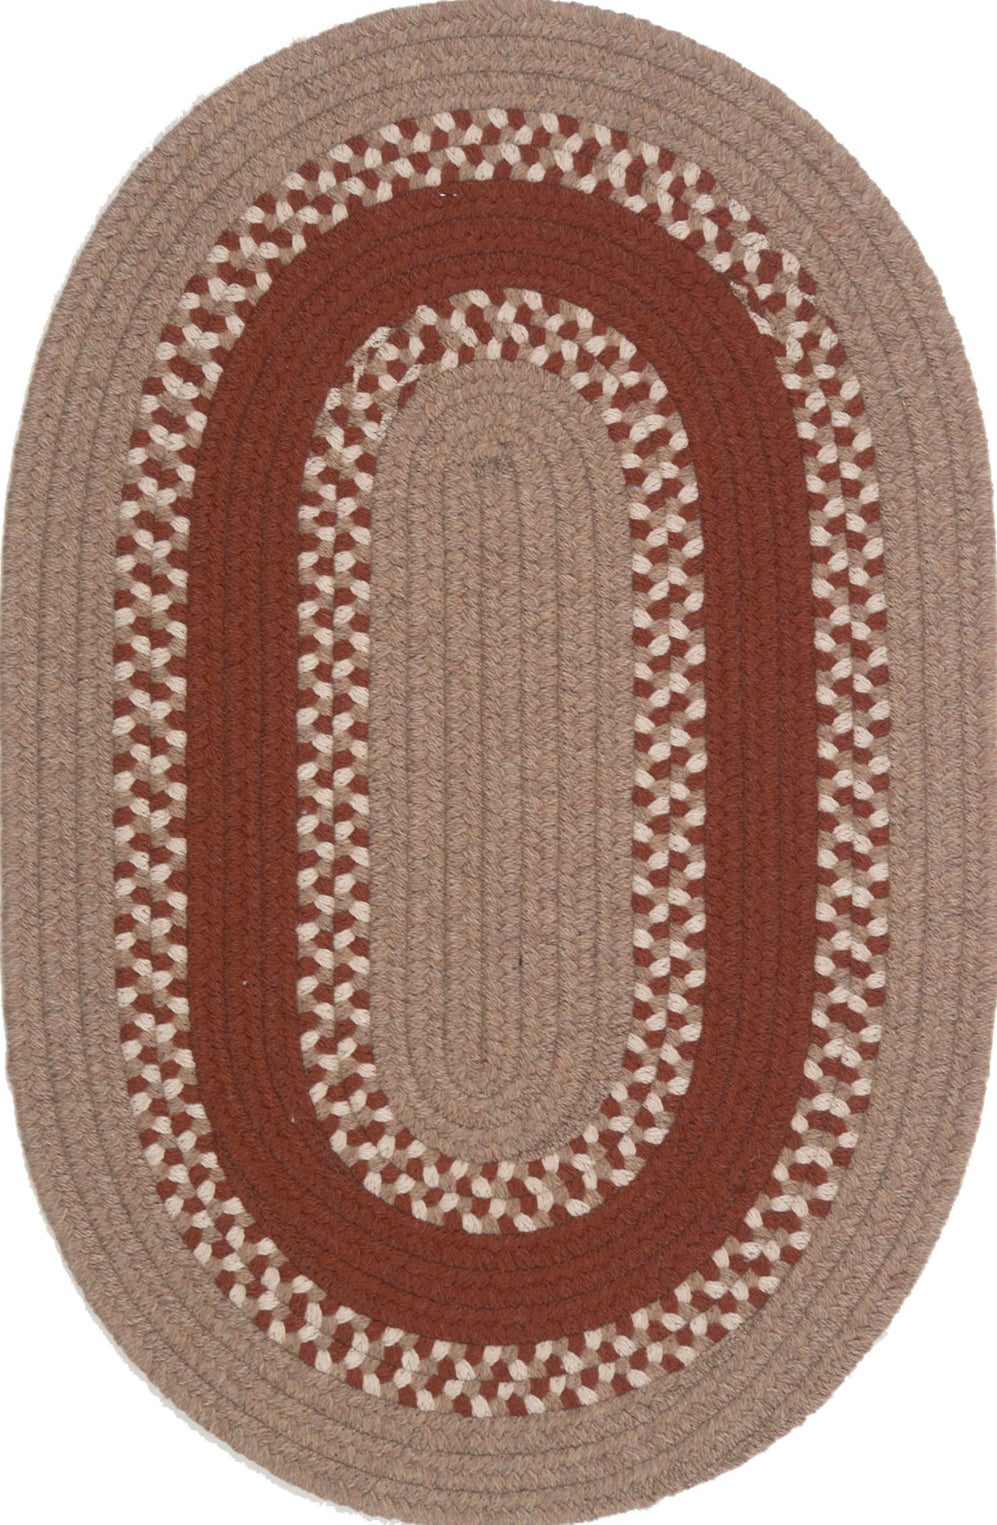 Colonial Mills Corsair Banded Oval CI87 Natural Area Rug